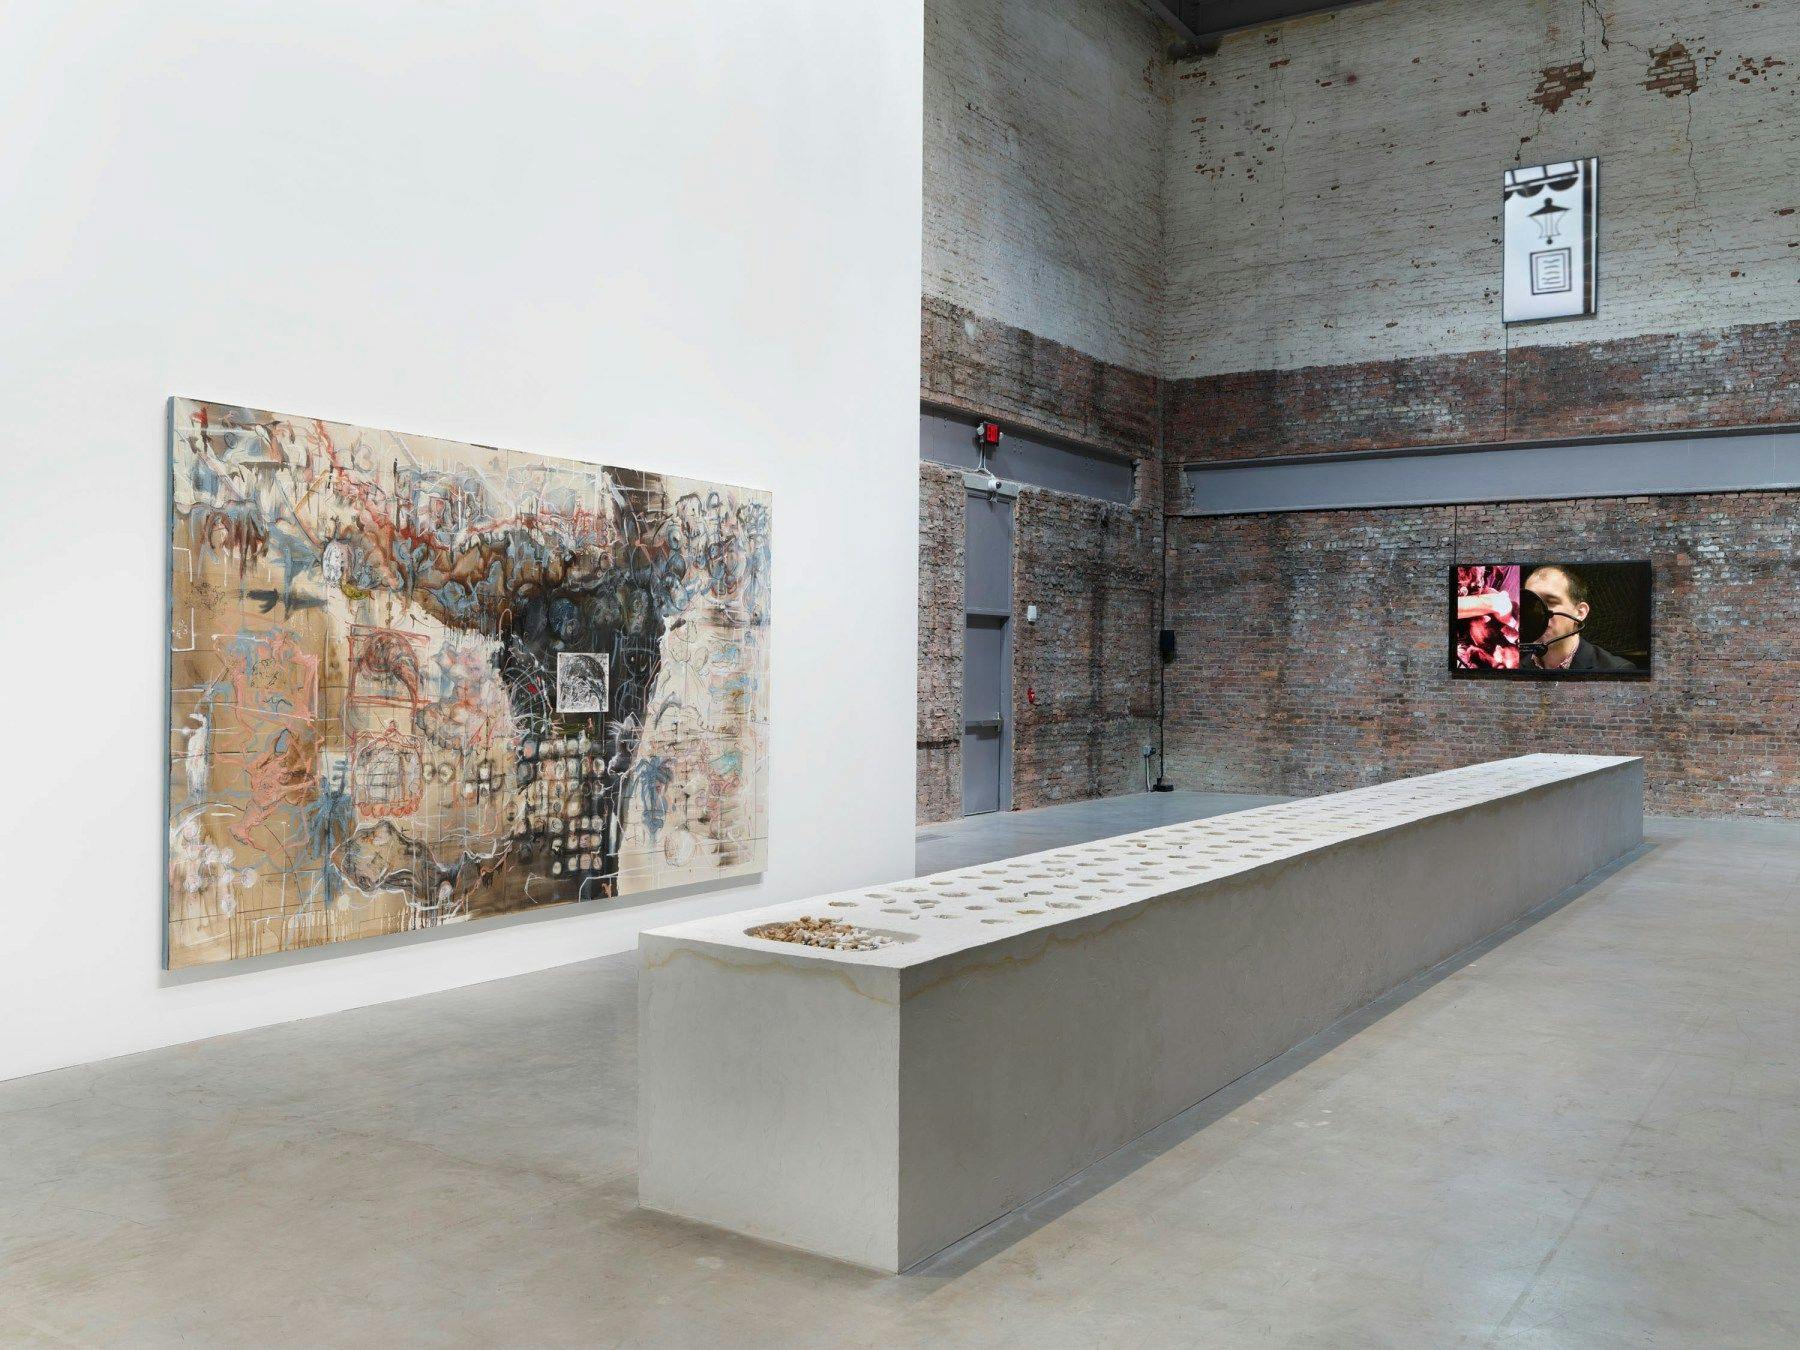 Installation view of “House” at Gavin Brown Enterprise, New York, NY, 2020